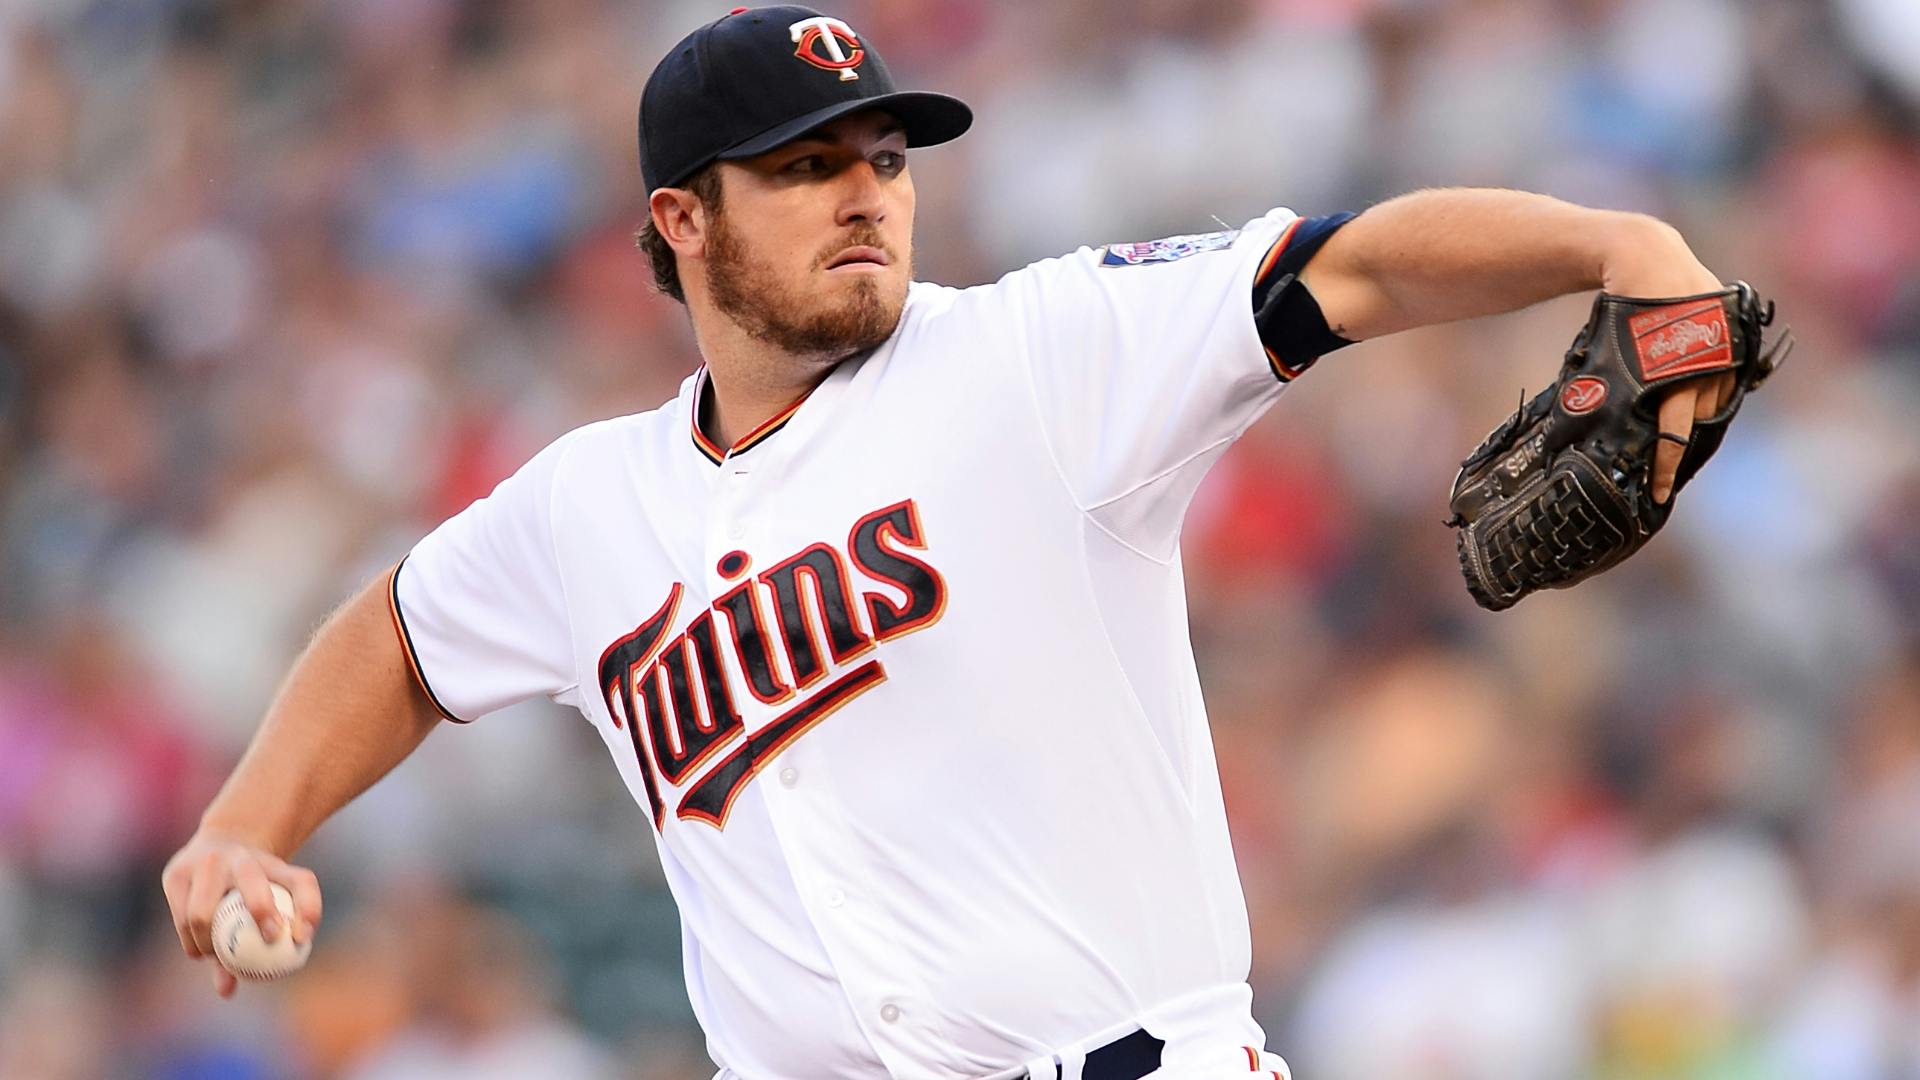 Twins righthander Phil Hughes says it was nice, after giving up a homer in eight straight games, to break that streak with seven shutout innings on Friday.